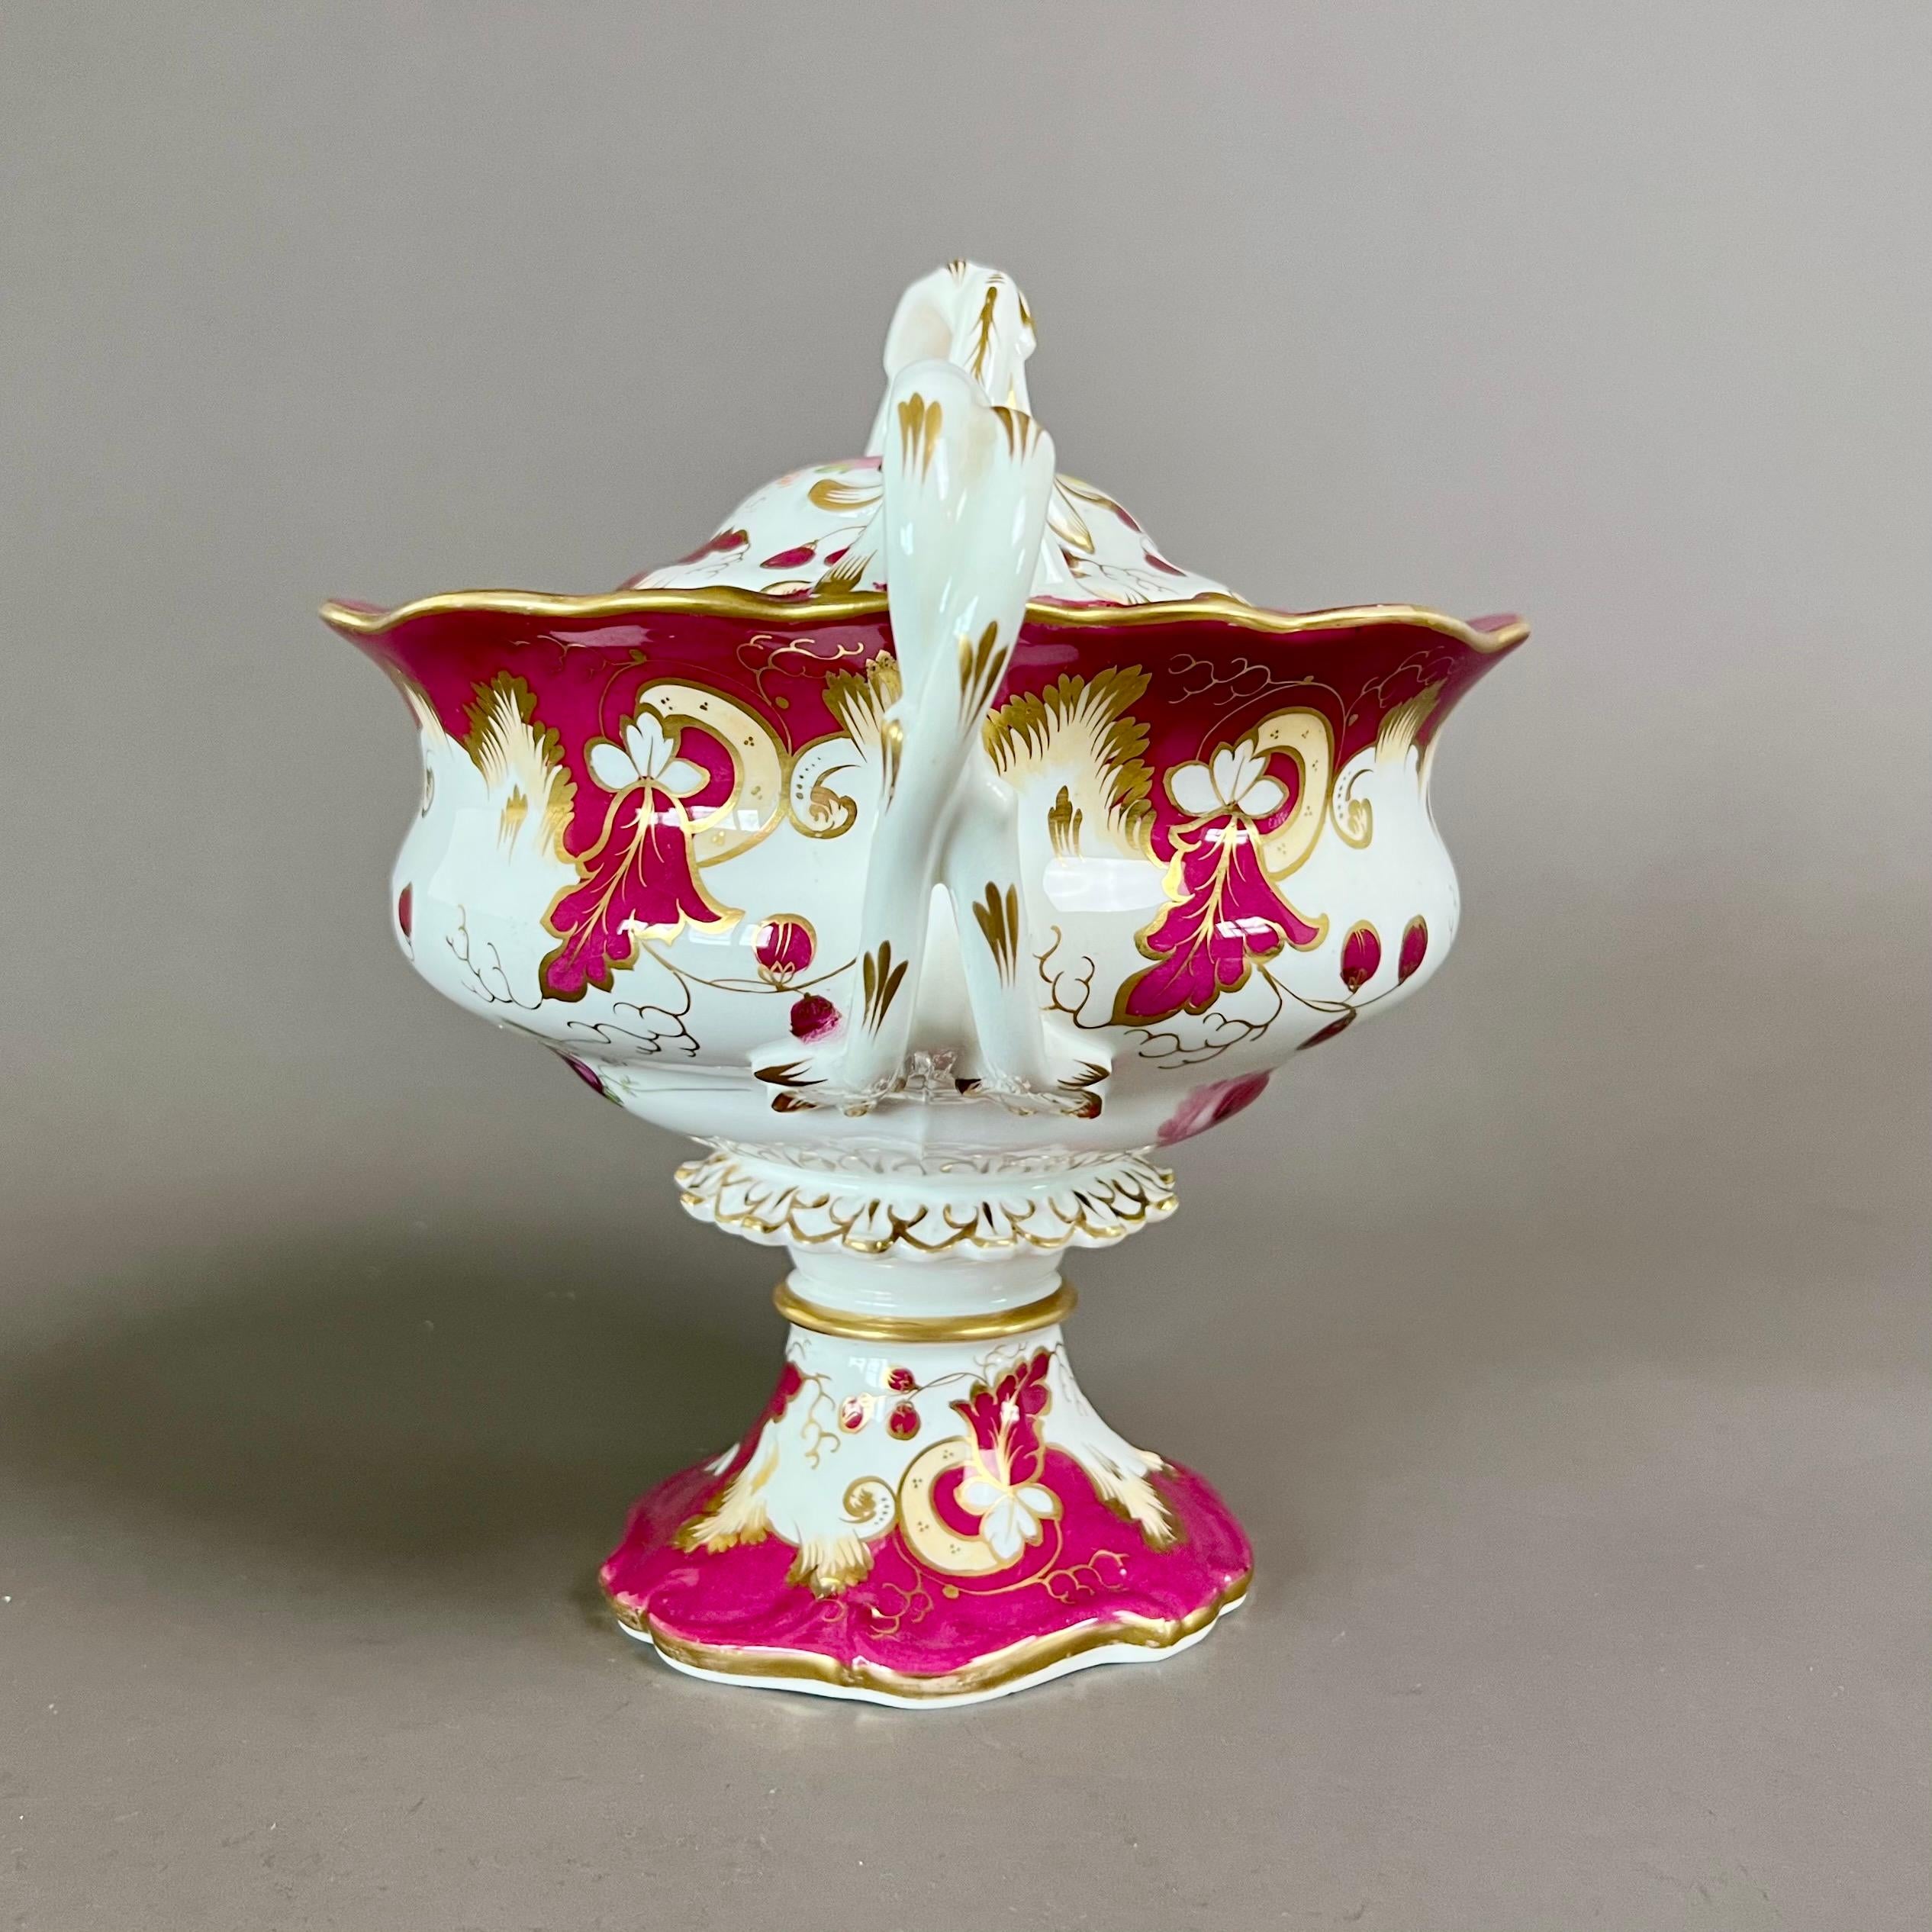 A footed two-handled sauce tureen with cover, maroon and pale yellow ground with beautiful hand painted flower sprays on lower part of body; twisted handles and a petticoat stem

Pattern 2/817
Year: ca 1842
Size: 20cm tall incl. finial